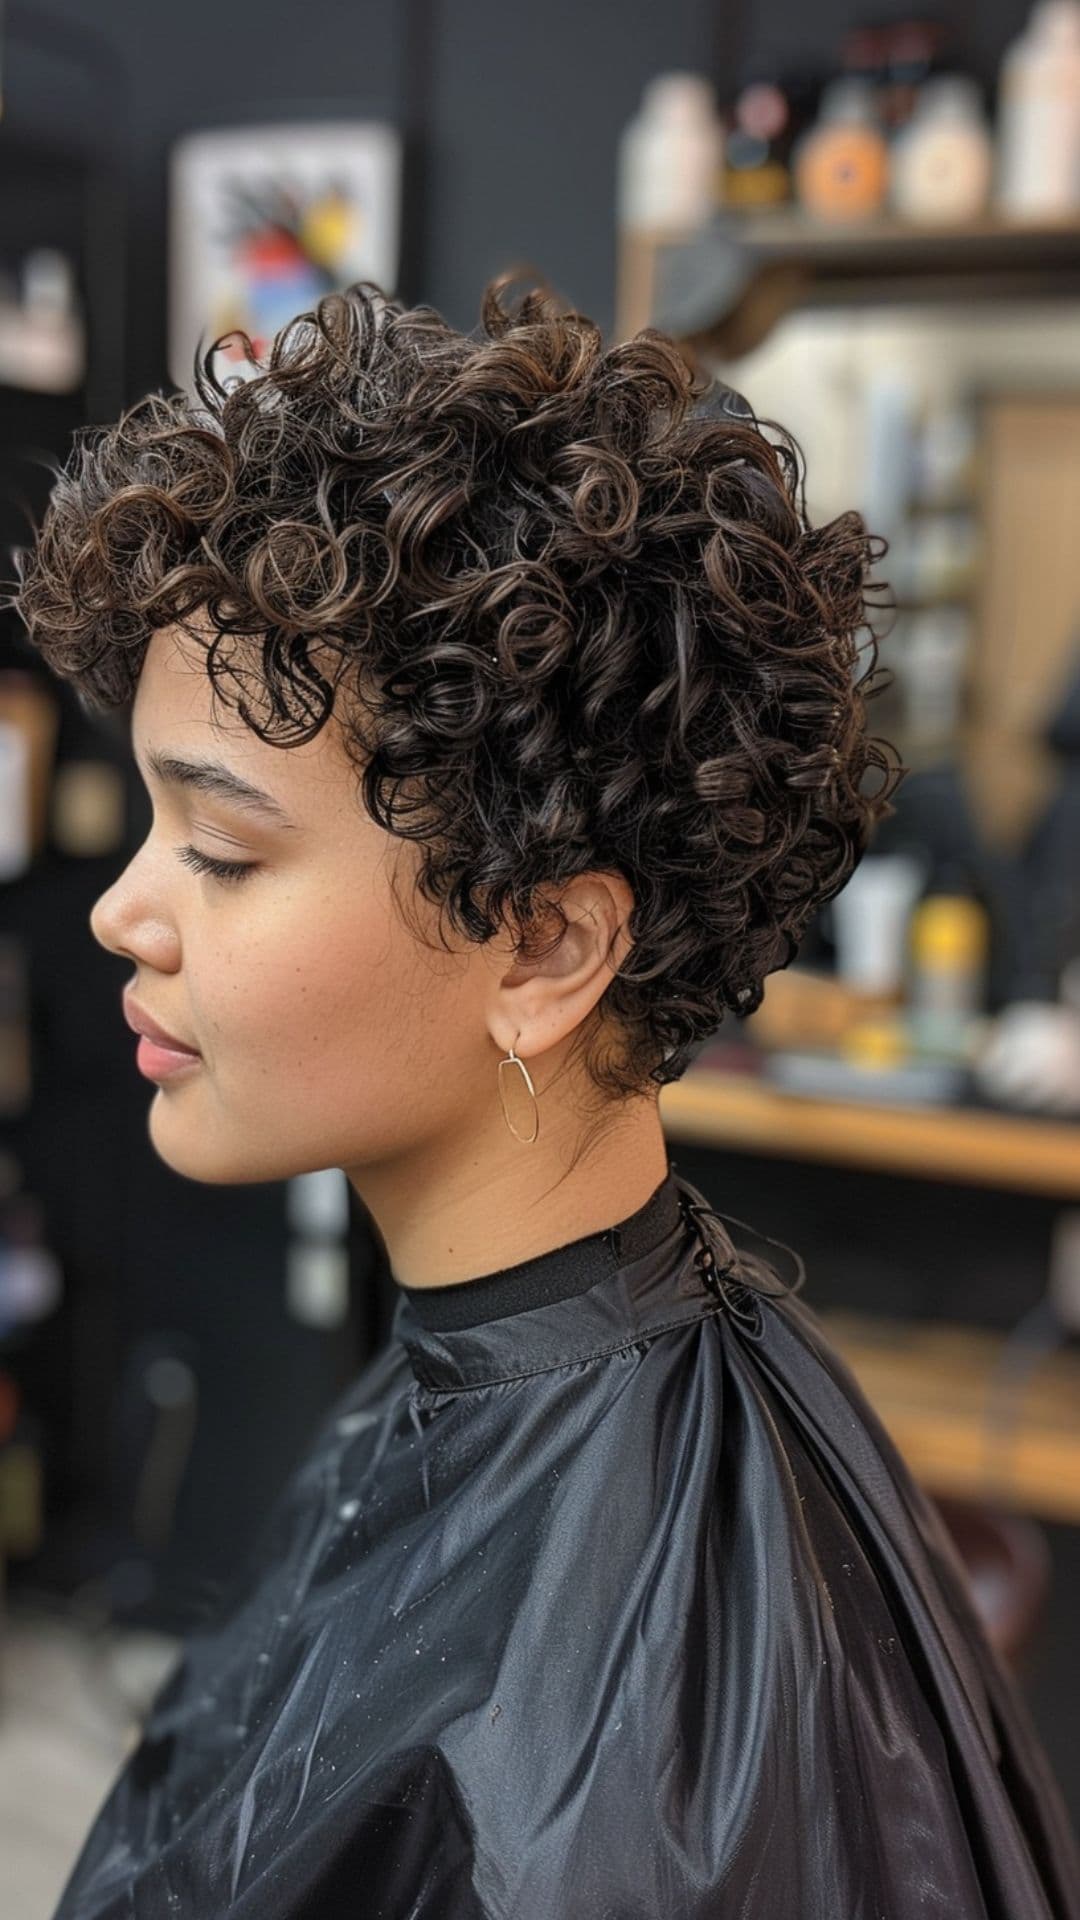 A woman modelling a curly pixie cut with volume.